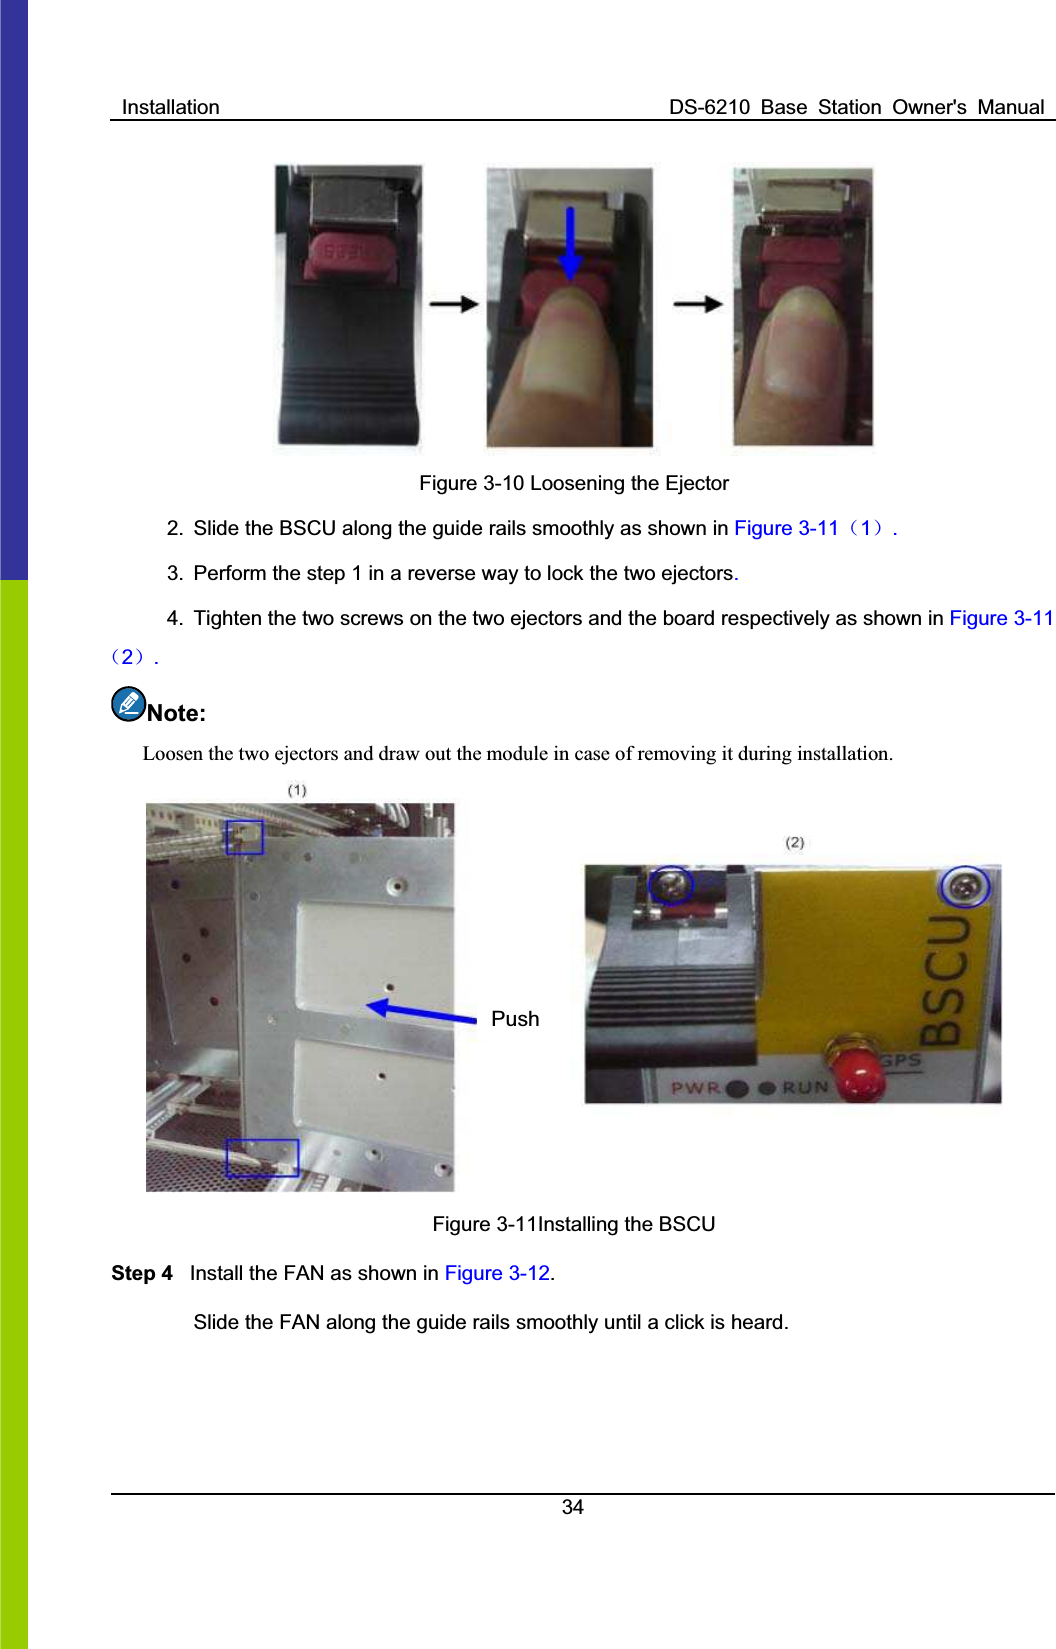 Installation  DS-6210  Base  Station  Owner&apos;s  Manual34Figure 3-10 Loosening the Ejector 2.  Slide the BSCU along the guide rails smoothly as shown in Figure 3-11˄1˅.3.  Perform the step 1 in a reverse way to lock the two ejectors.4.  Tighten the two screws on the two ejectors and the board respectively as shown in Figure 3-11˄2˅.Note:Loosen the two ejectors and draw out the module in case of removing it during installation.   PushFigure 3-11Installing the BSCU   Step 4  Install the FAN as shown in Figure 3-12.Slide the FAN along the guide rails smoothly until a click is heard.   